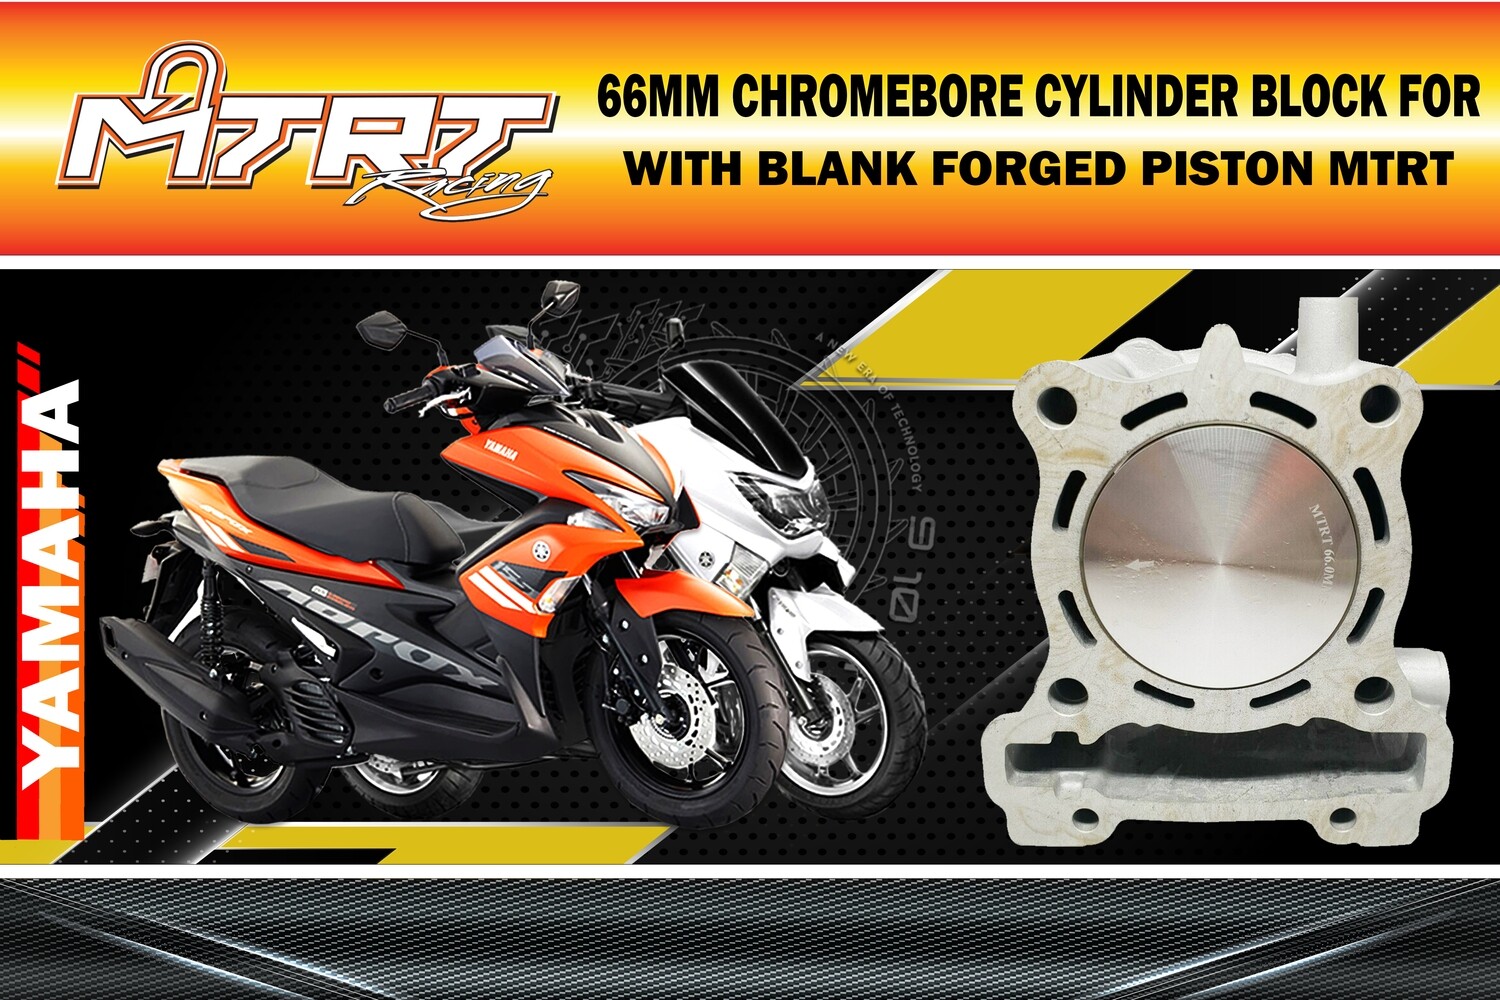 66MM CHROMEBORE CYLINDER BLOCK FOR NMAX/AEROX WITH BLANK FORGED PISTON MTRT